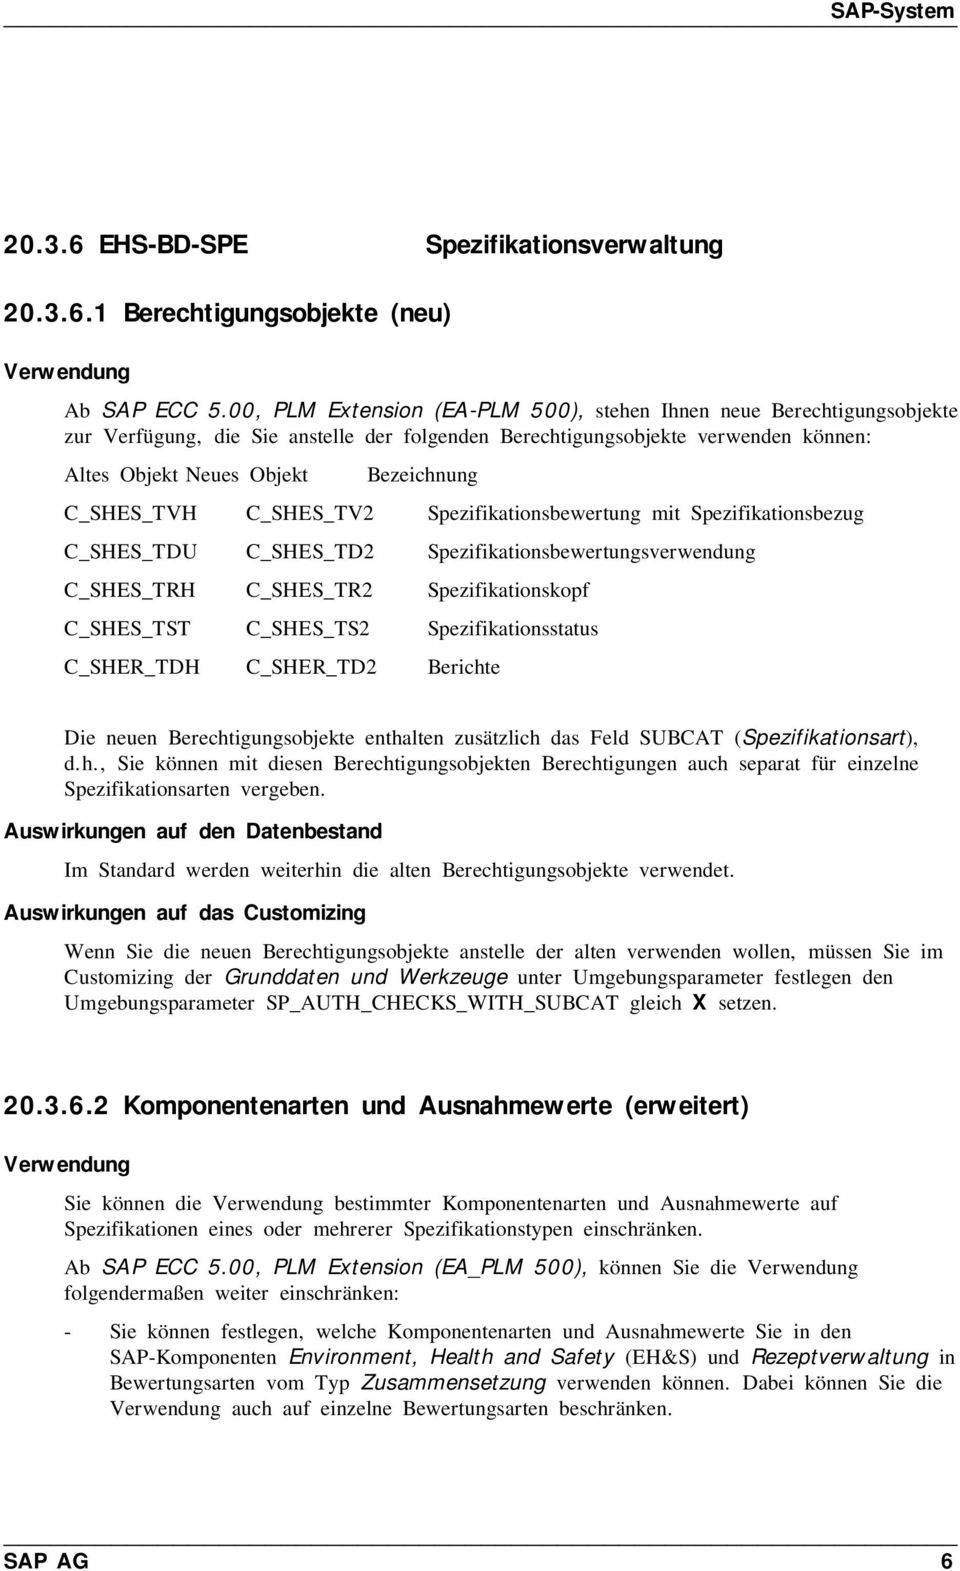 C_SHES_TVH C_SHES_TV2 Spezifikationsbewertung mit Spezifikationsbezug C_SHES_TDU C_SHES_TD2 Spezifikationsbewertungsverwendung C_SHES_TRH C_SHES_TR2 Spezifikationskopf C_SHES_TST C_SHES_TS2